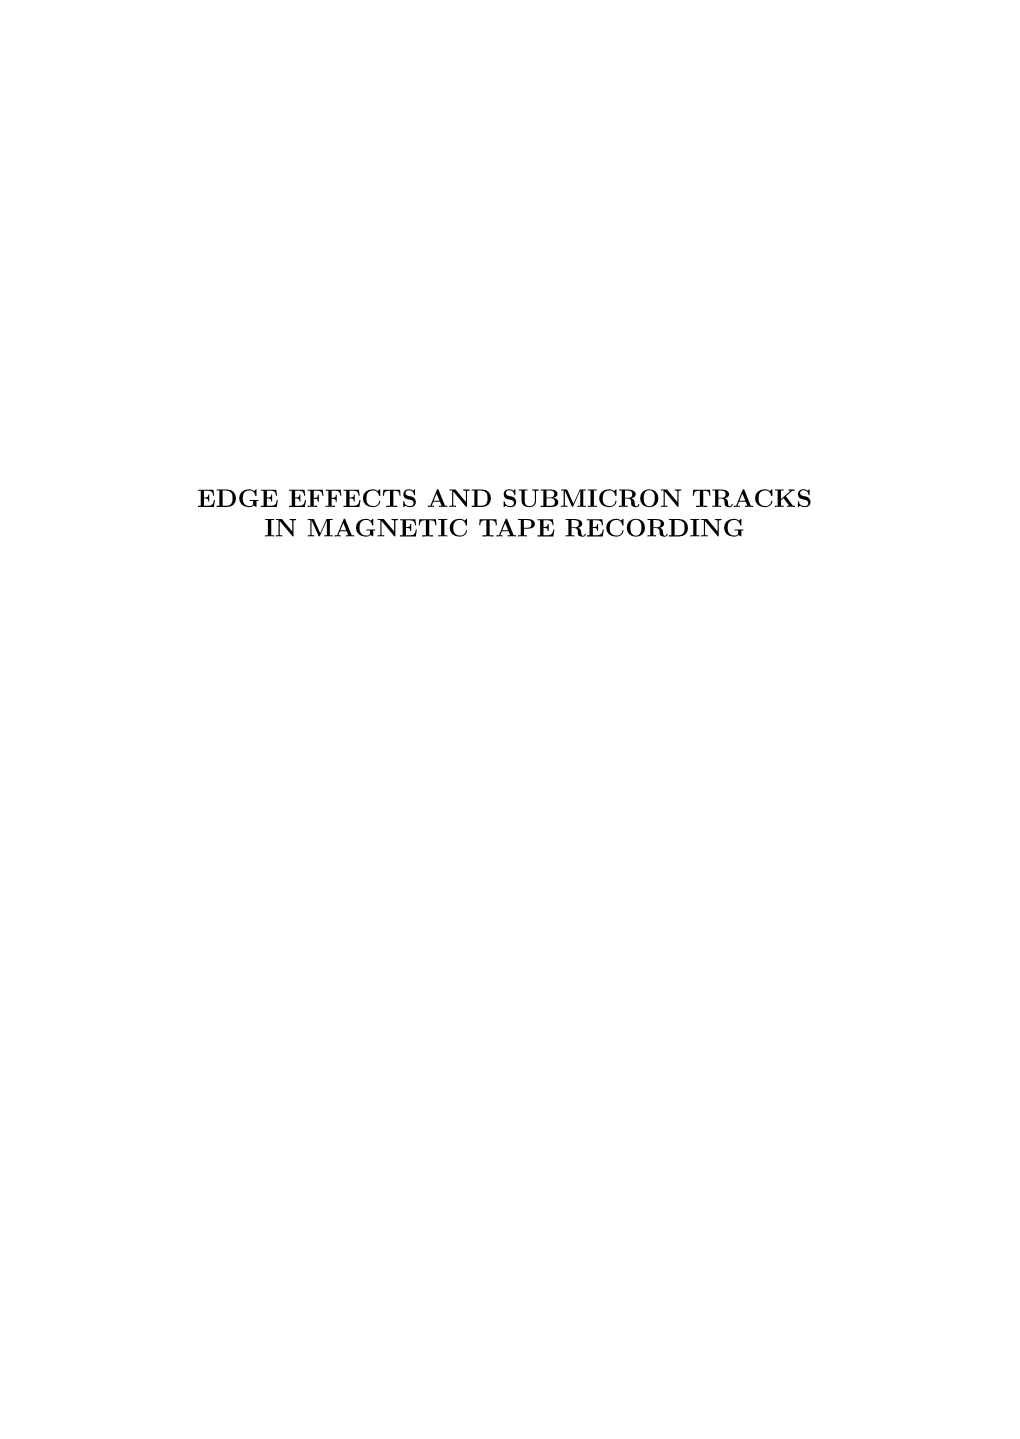 EDGE EFFECTS and SUBMICRON TRACKS in MAGNETIC TAPE RECORDING Graduation Committee